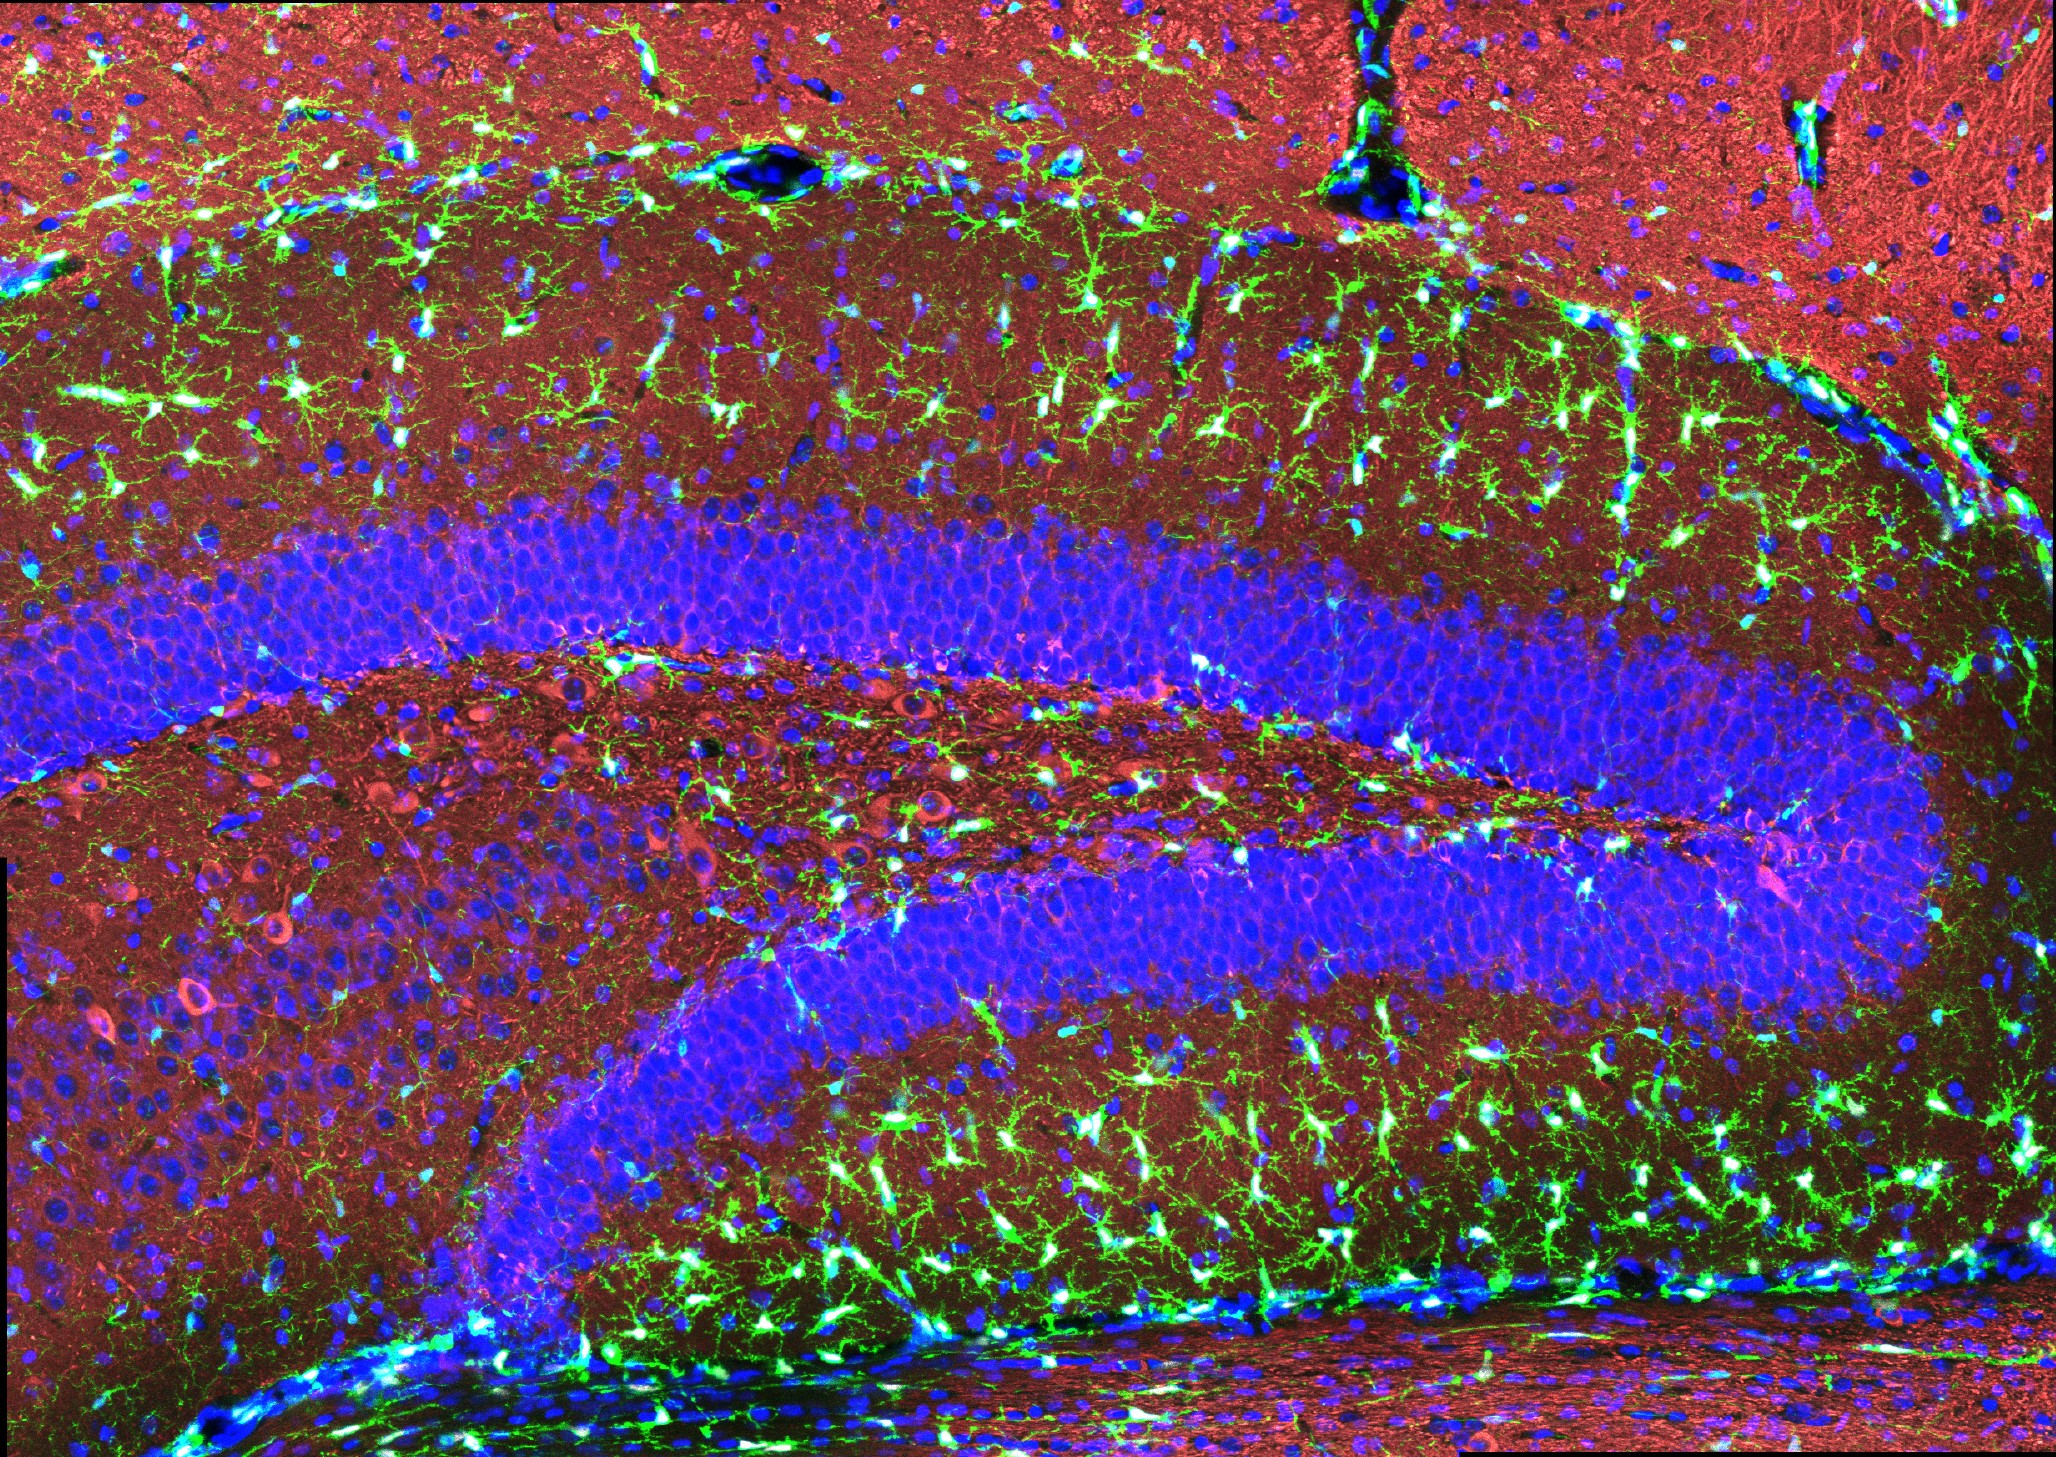 A colorfully stained section of a mouse hippocampus features scores of brightly glowing spiny-looking cells scattered throghout layers of tissue stained in blue and red